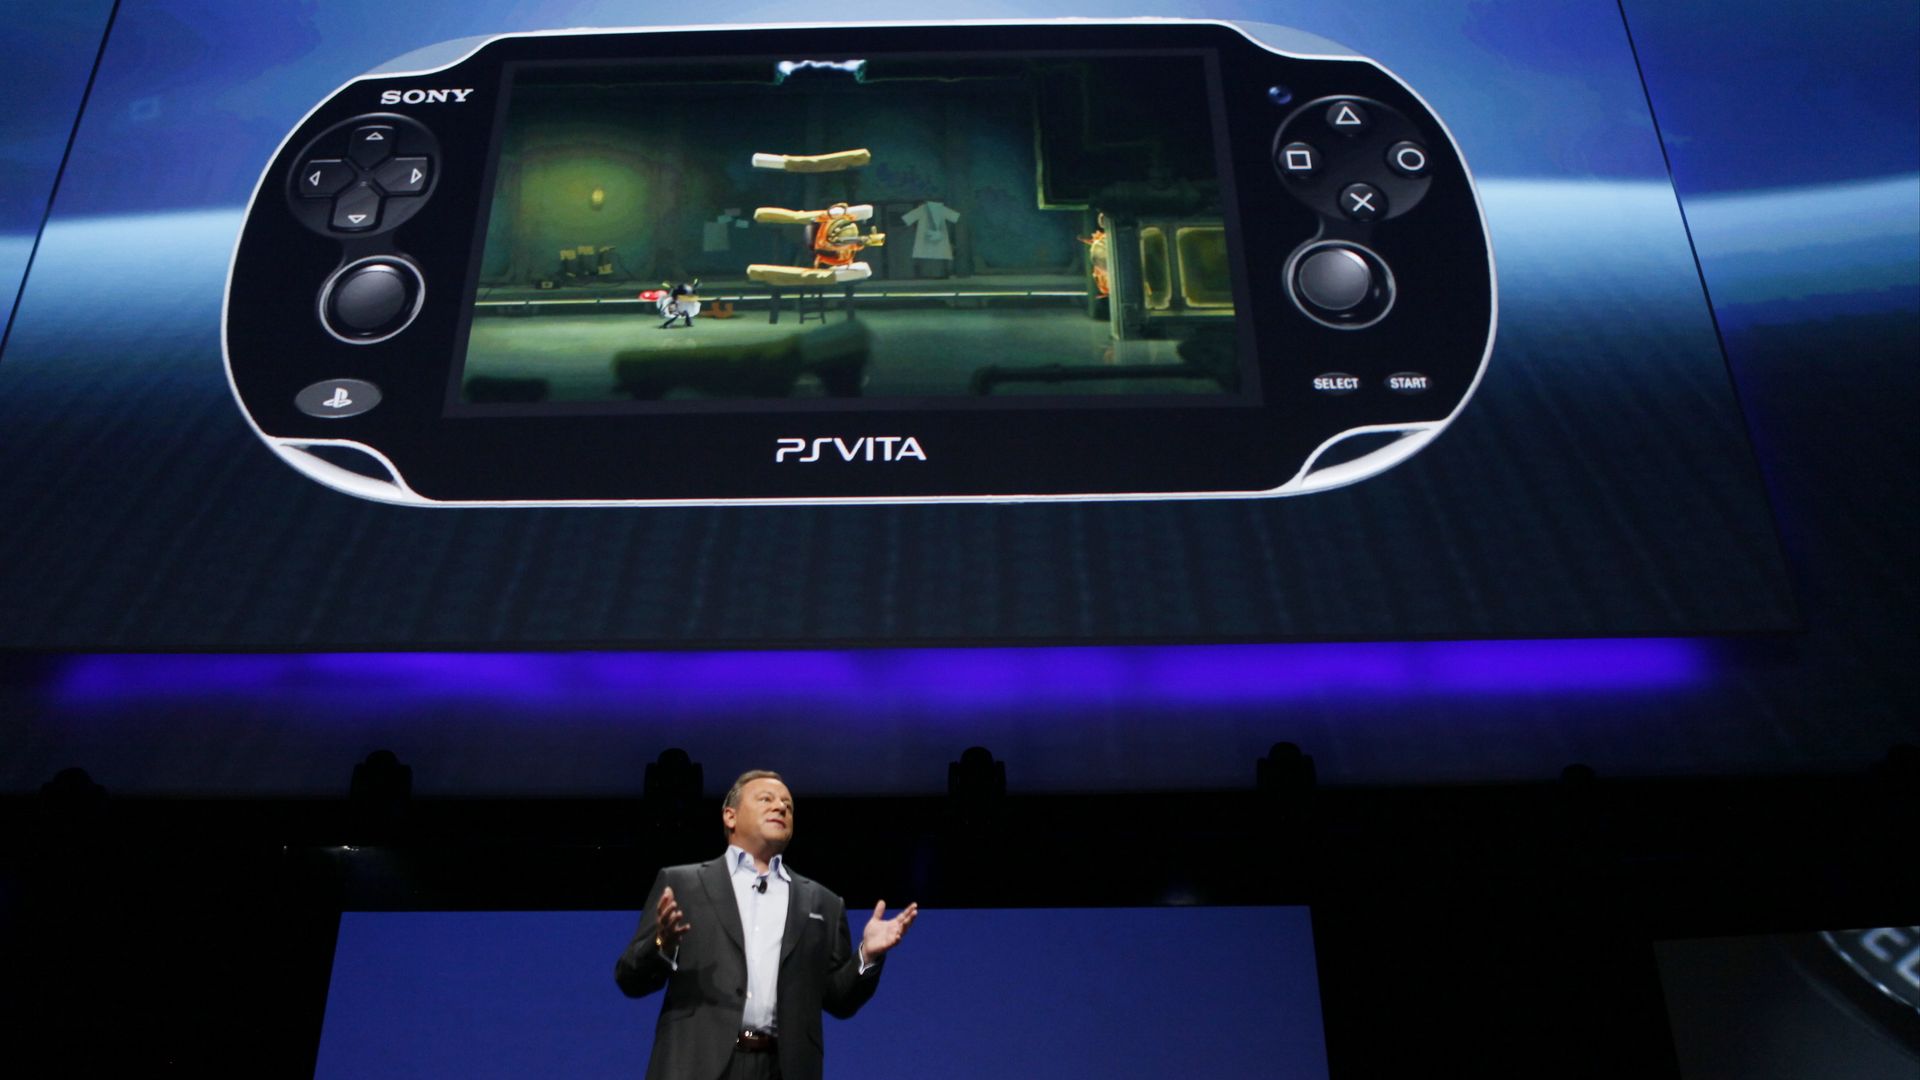 Photo of Jack Tretton in a suit standing on stage below a projection of a large portable gaming device